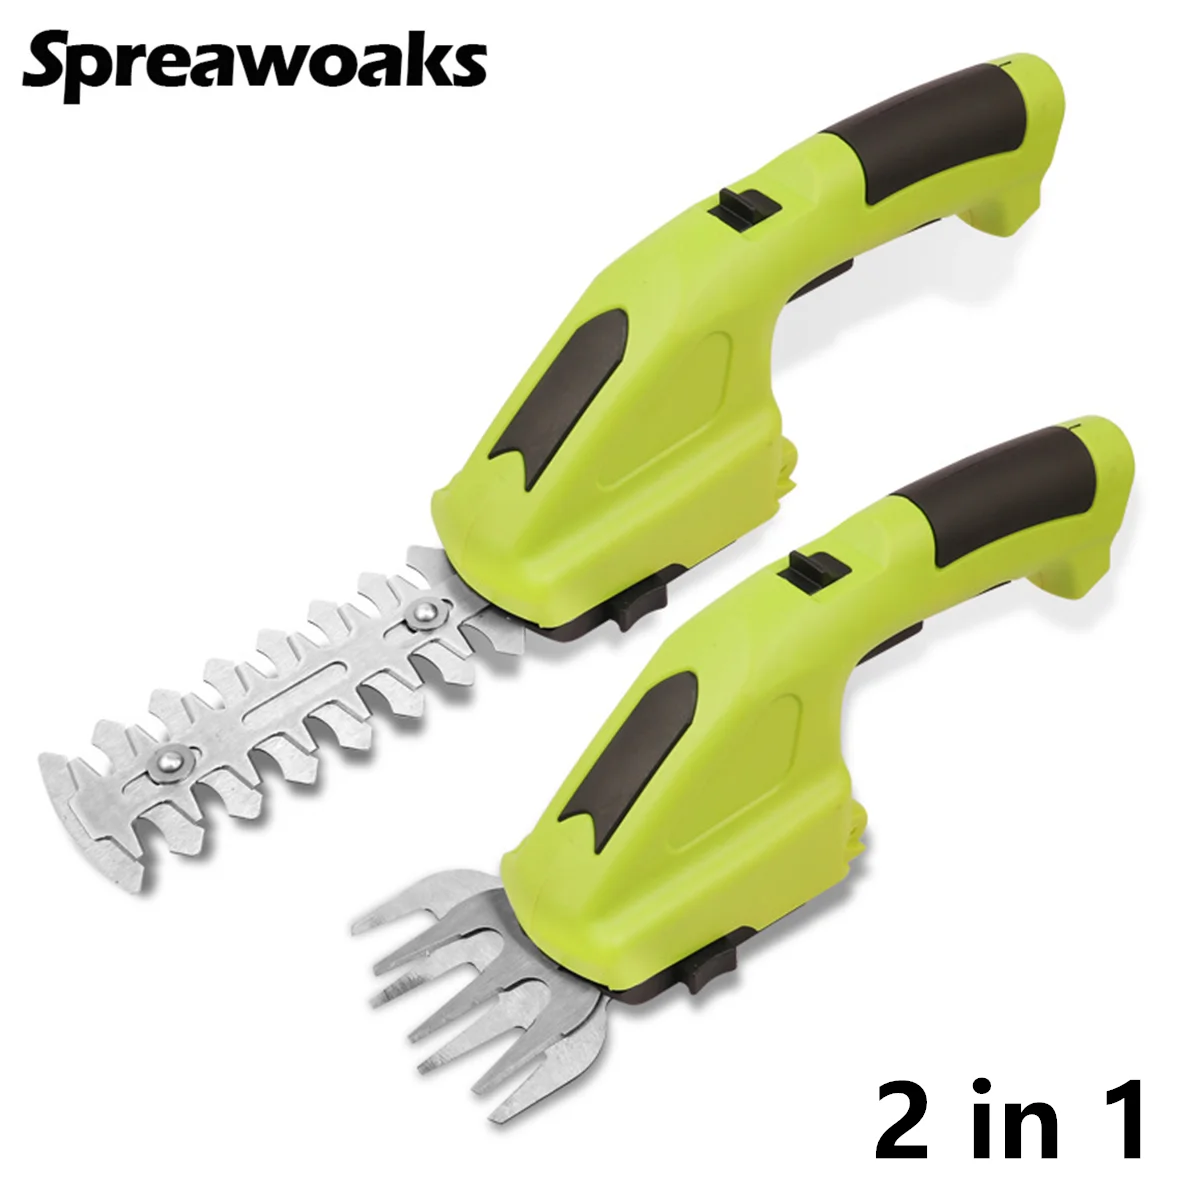 2 in 1 Cordless Hedge Trimmer Electric 3.6V USB Household Lawn Mower Rechargeable Weeding Shear Pruning Mower Garden Power Tools